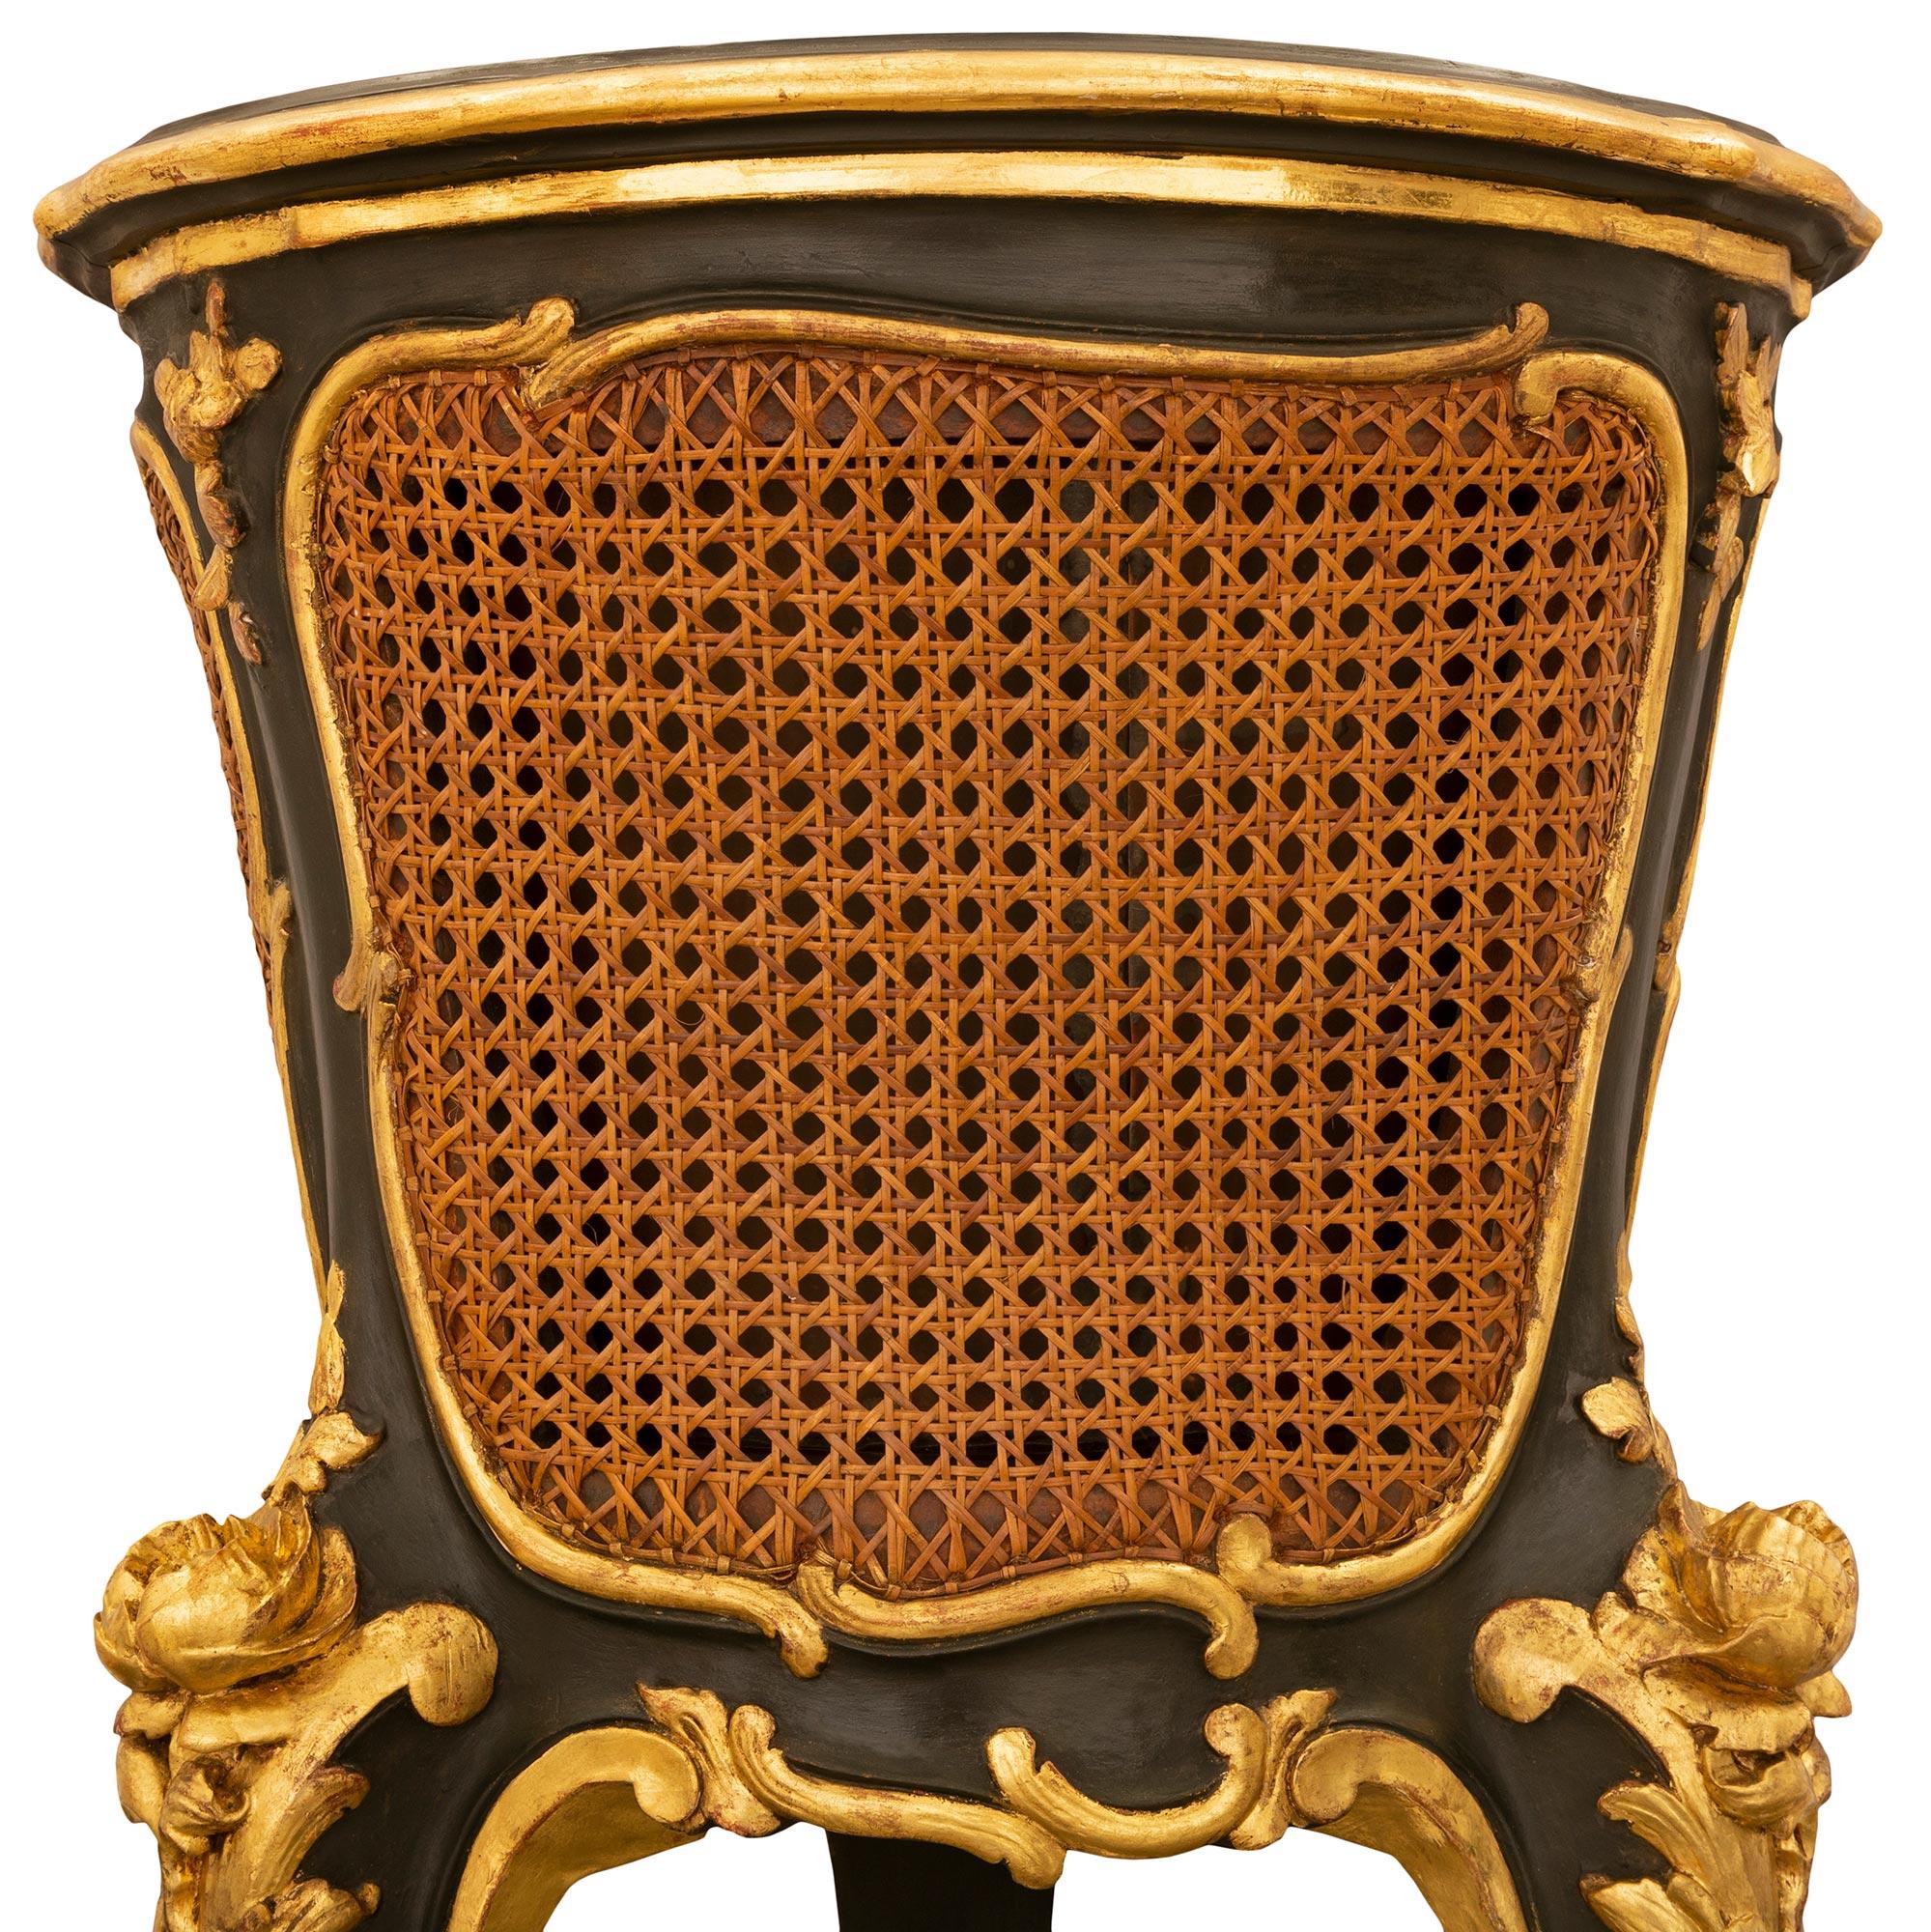 French, 19th Century, Belle Époque Period Polychrome and Giltwood Planter For Sale 3